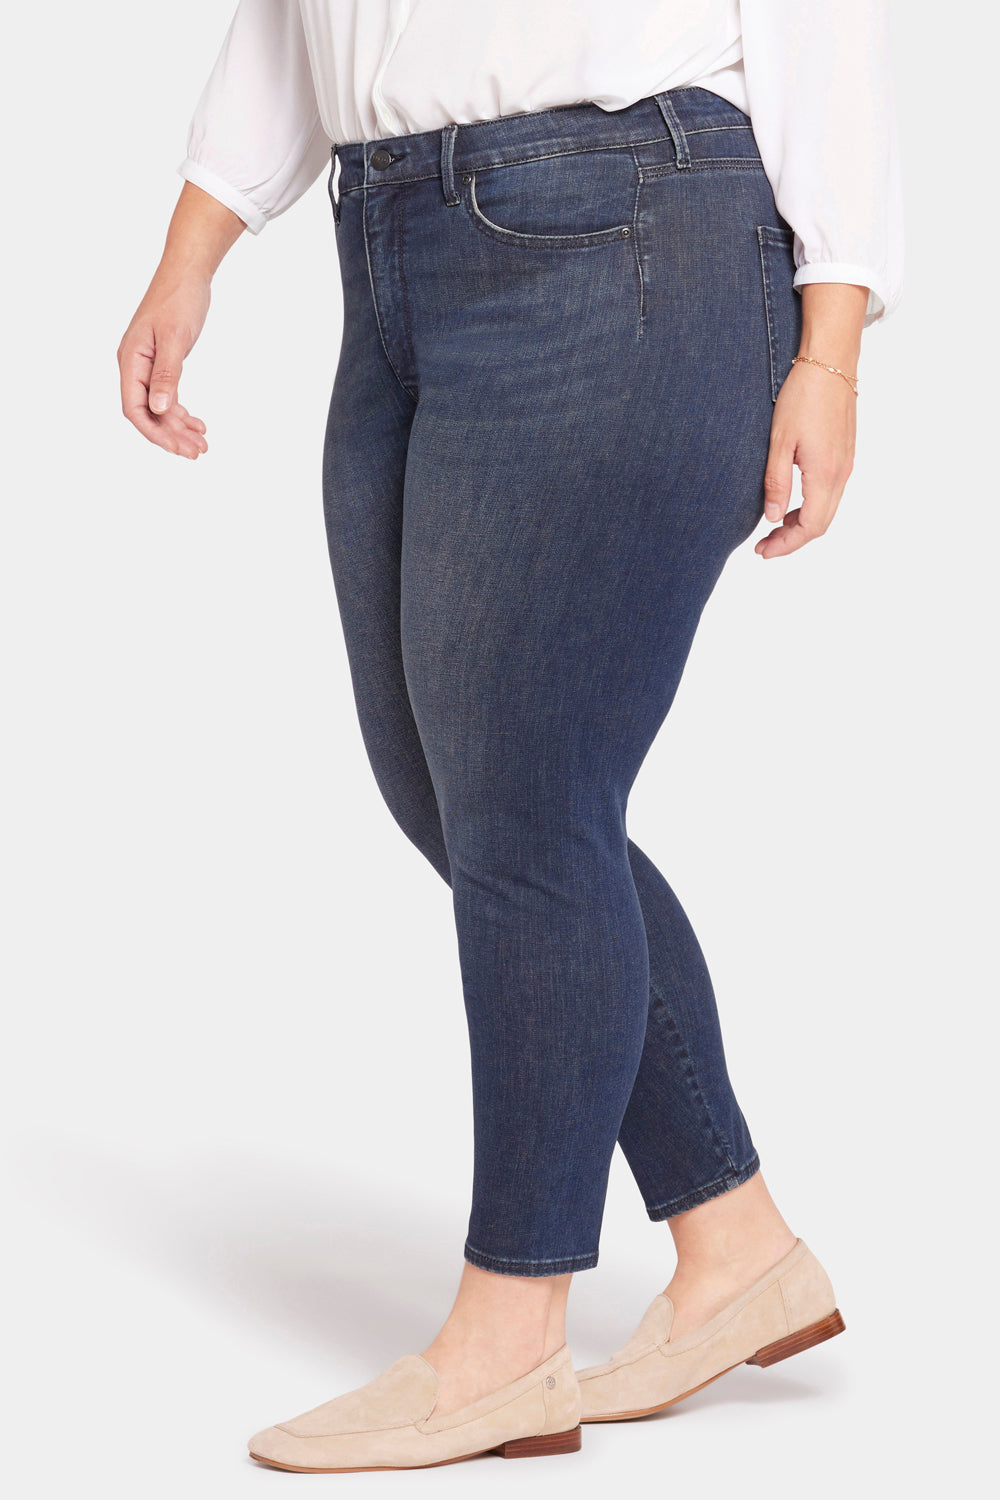 NYDJ Le Silhouette Ami Skinny Jeans In Petite Plus Size With High Rise - Precious